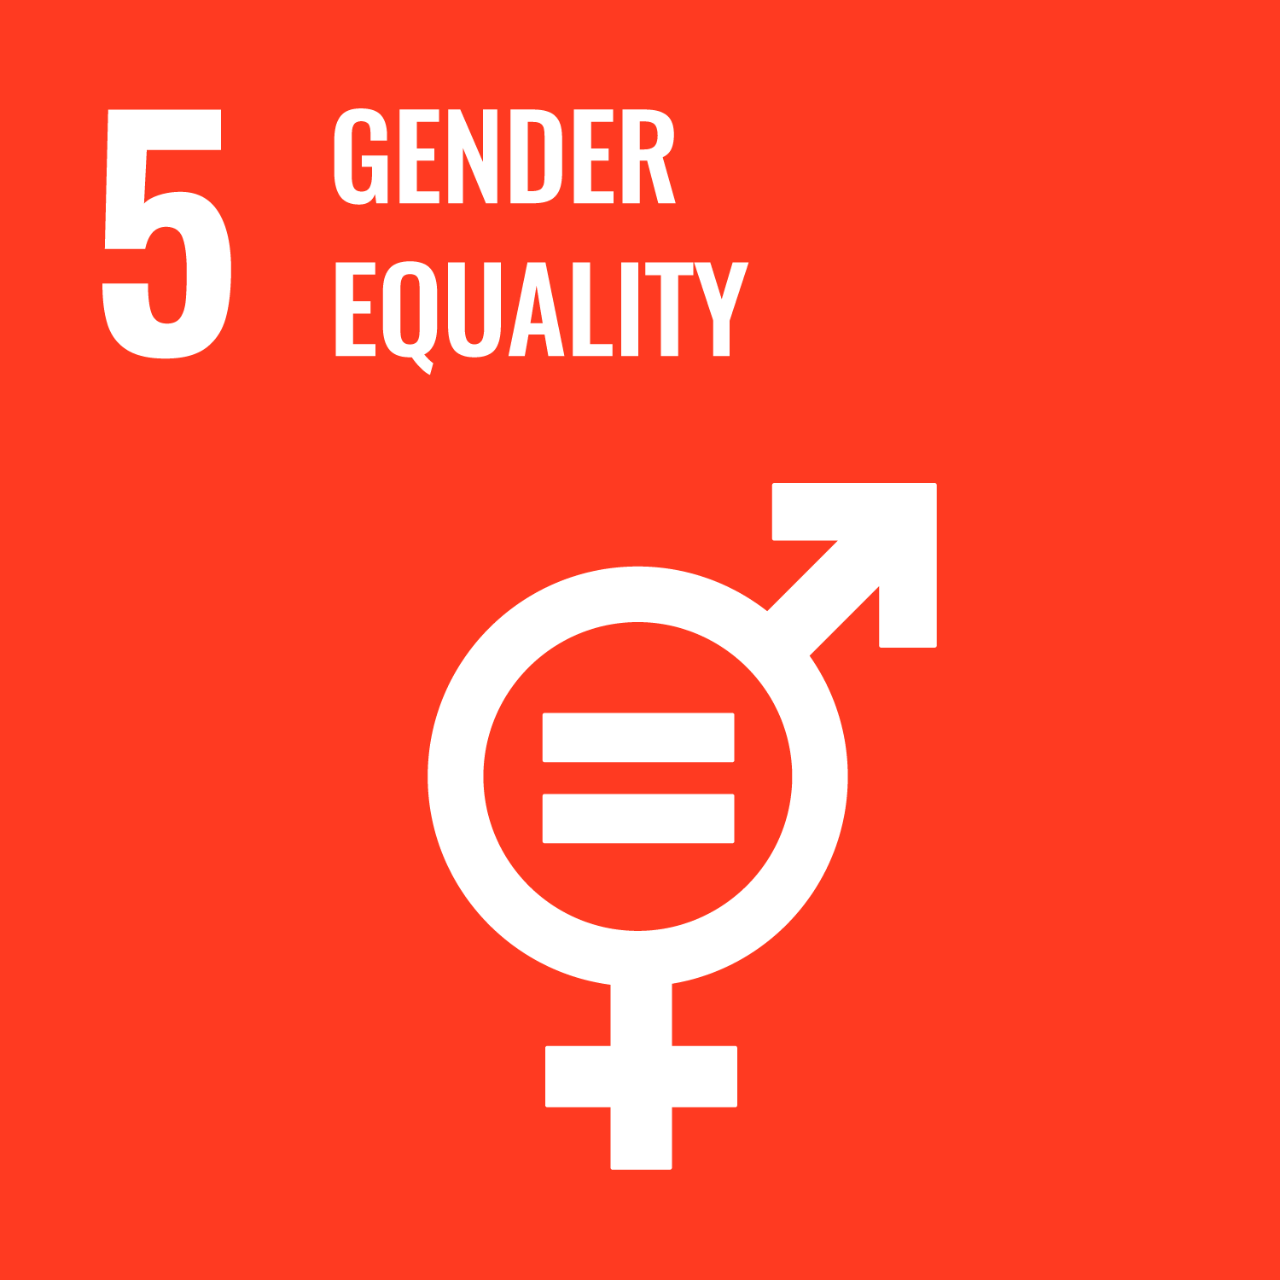 Dark orange icon with graphic of gender symbol and equal sign to represent UNSDG Goal 5: Gender Equality.